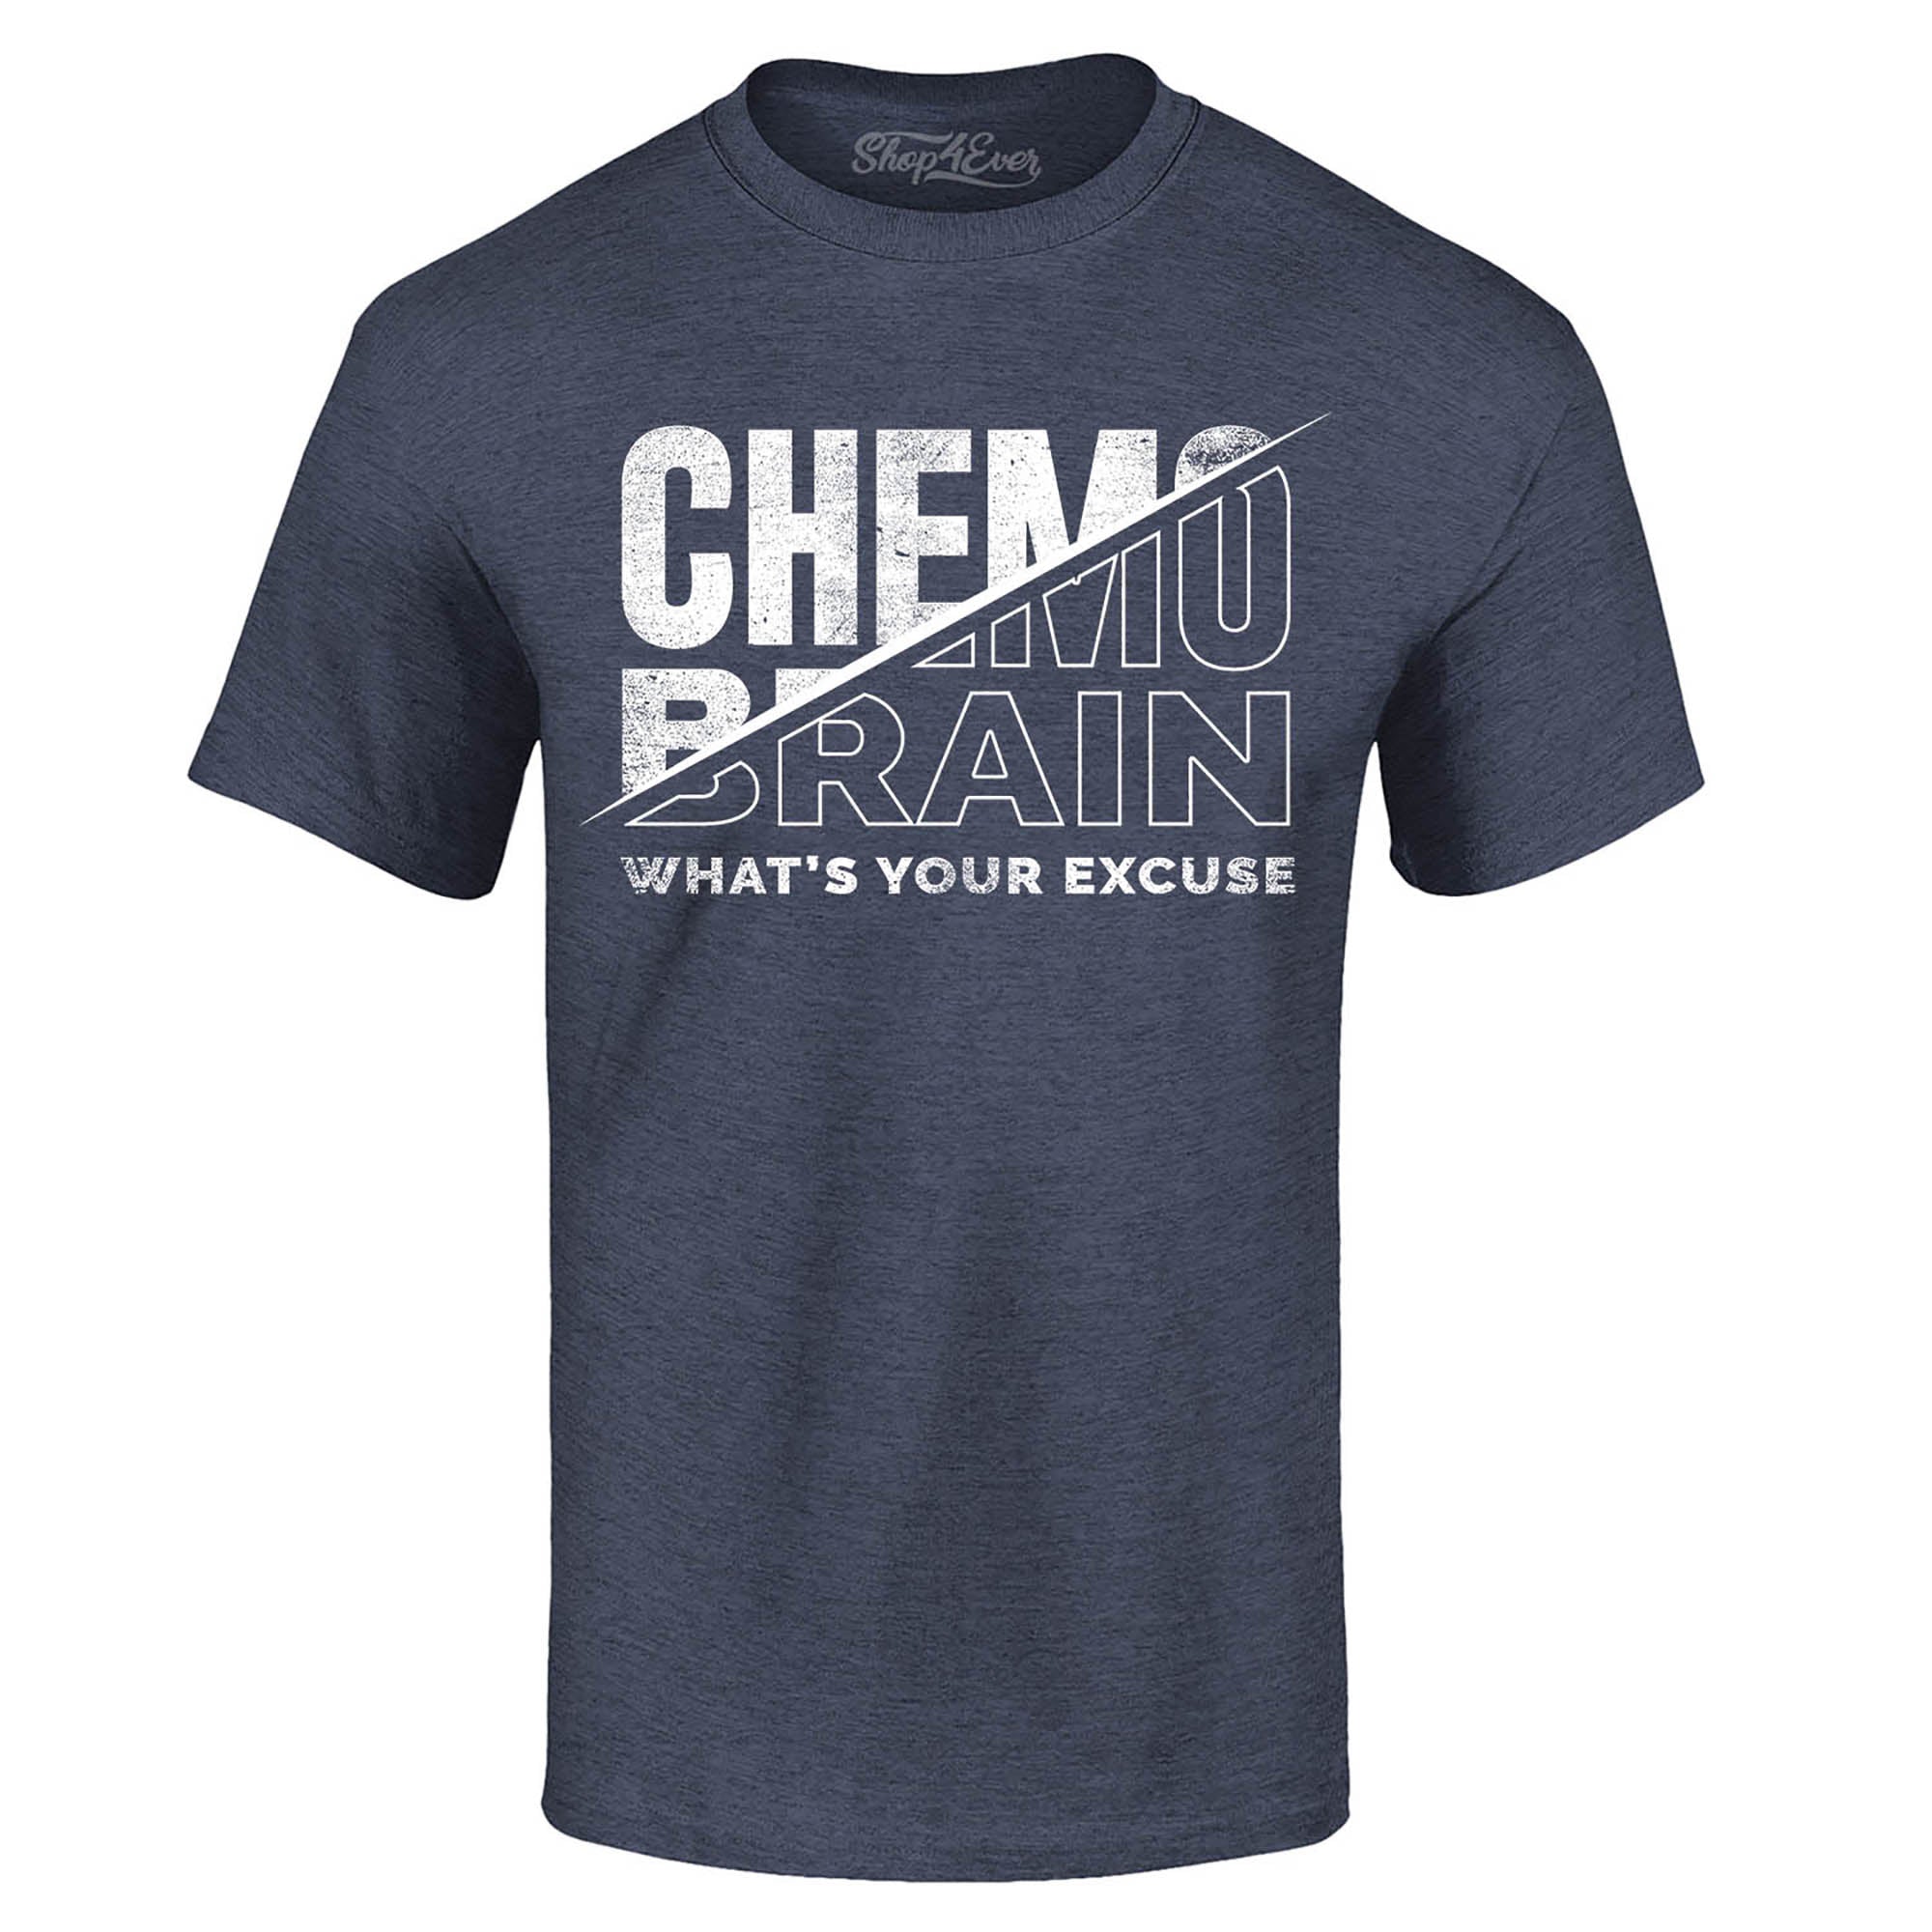 Chemo Brain What's Your Excuse? Funny T-Shirt